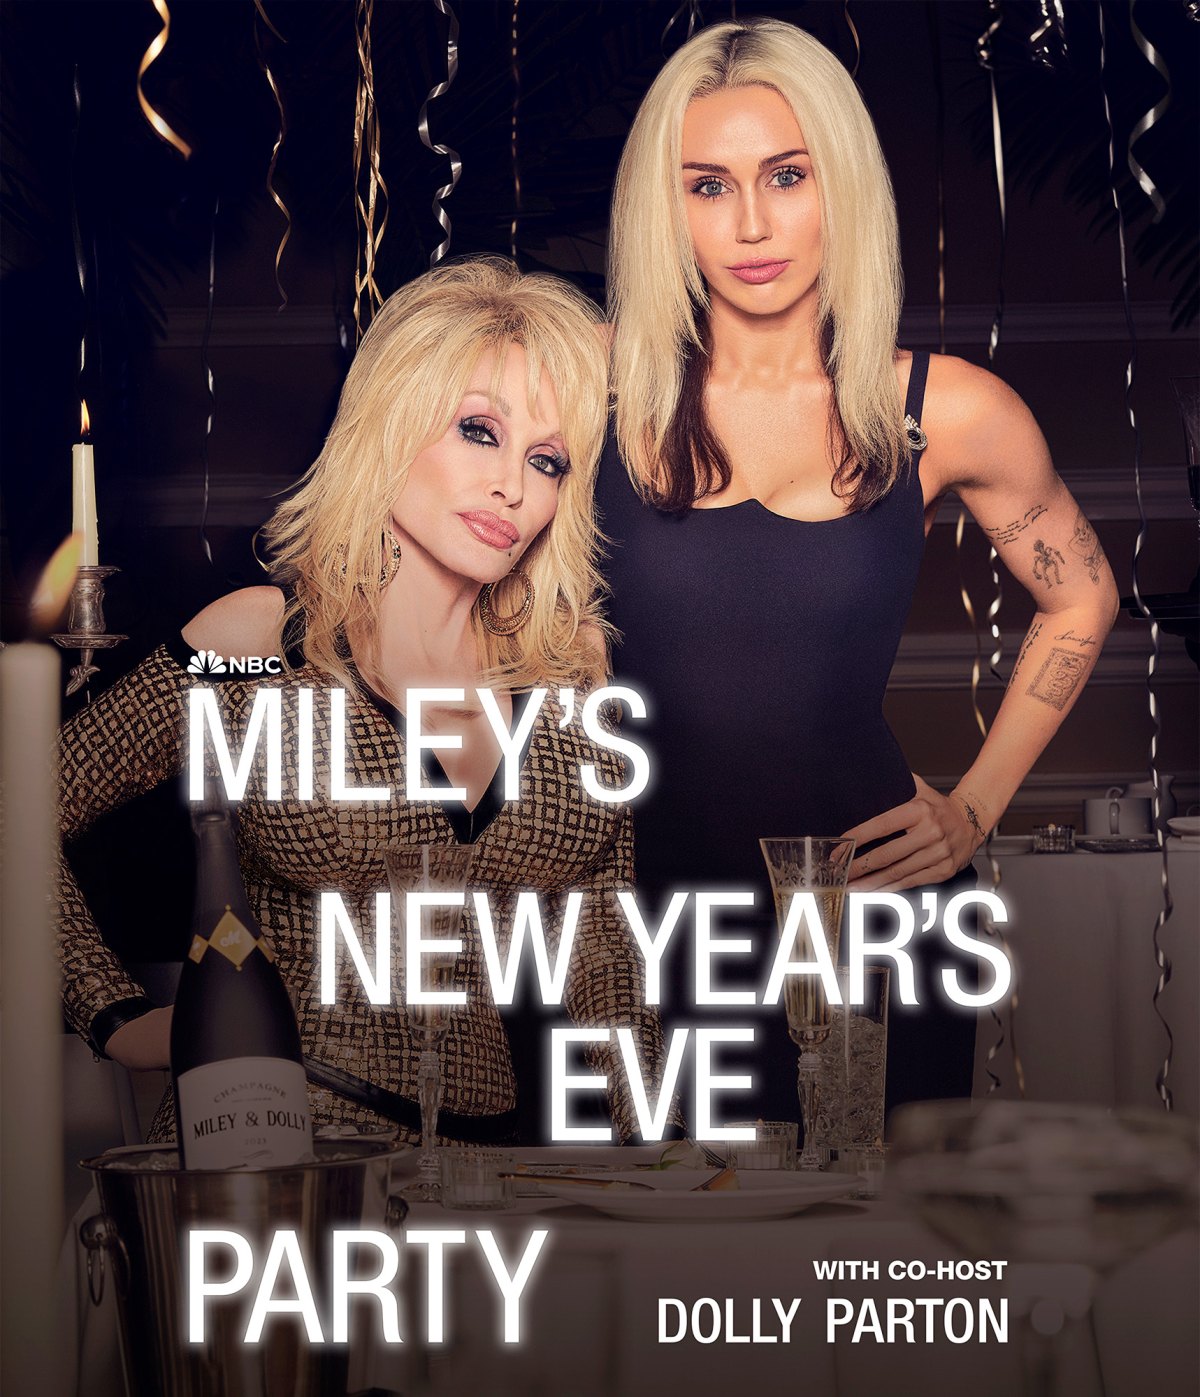 Miley's New Year's Eve Party' With Dolly Parton: How to Watch